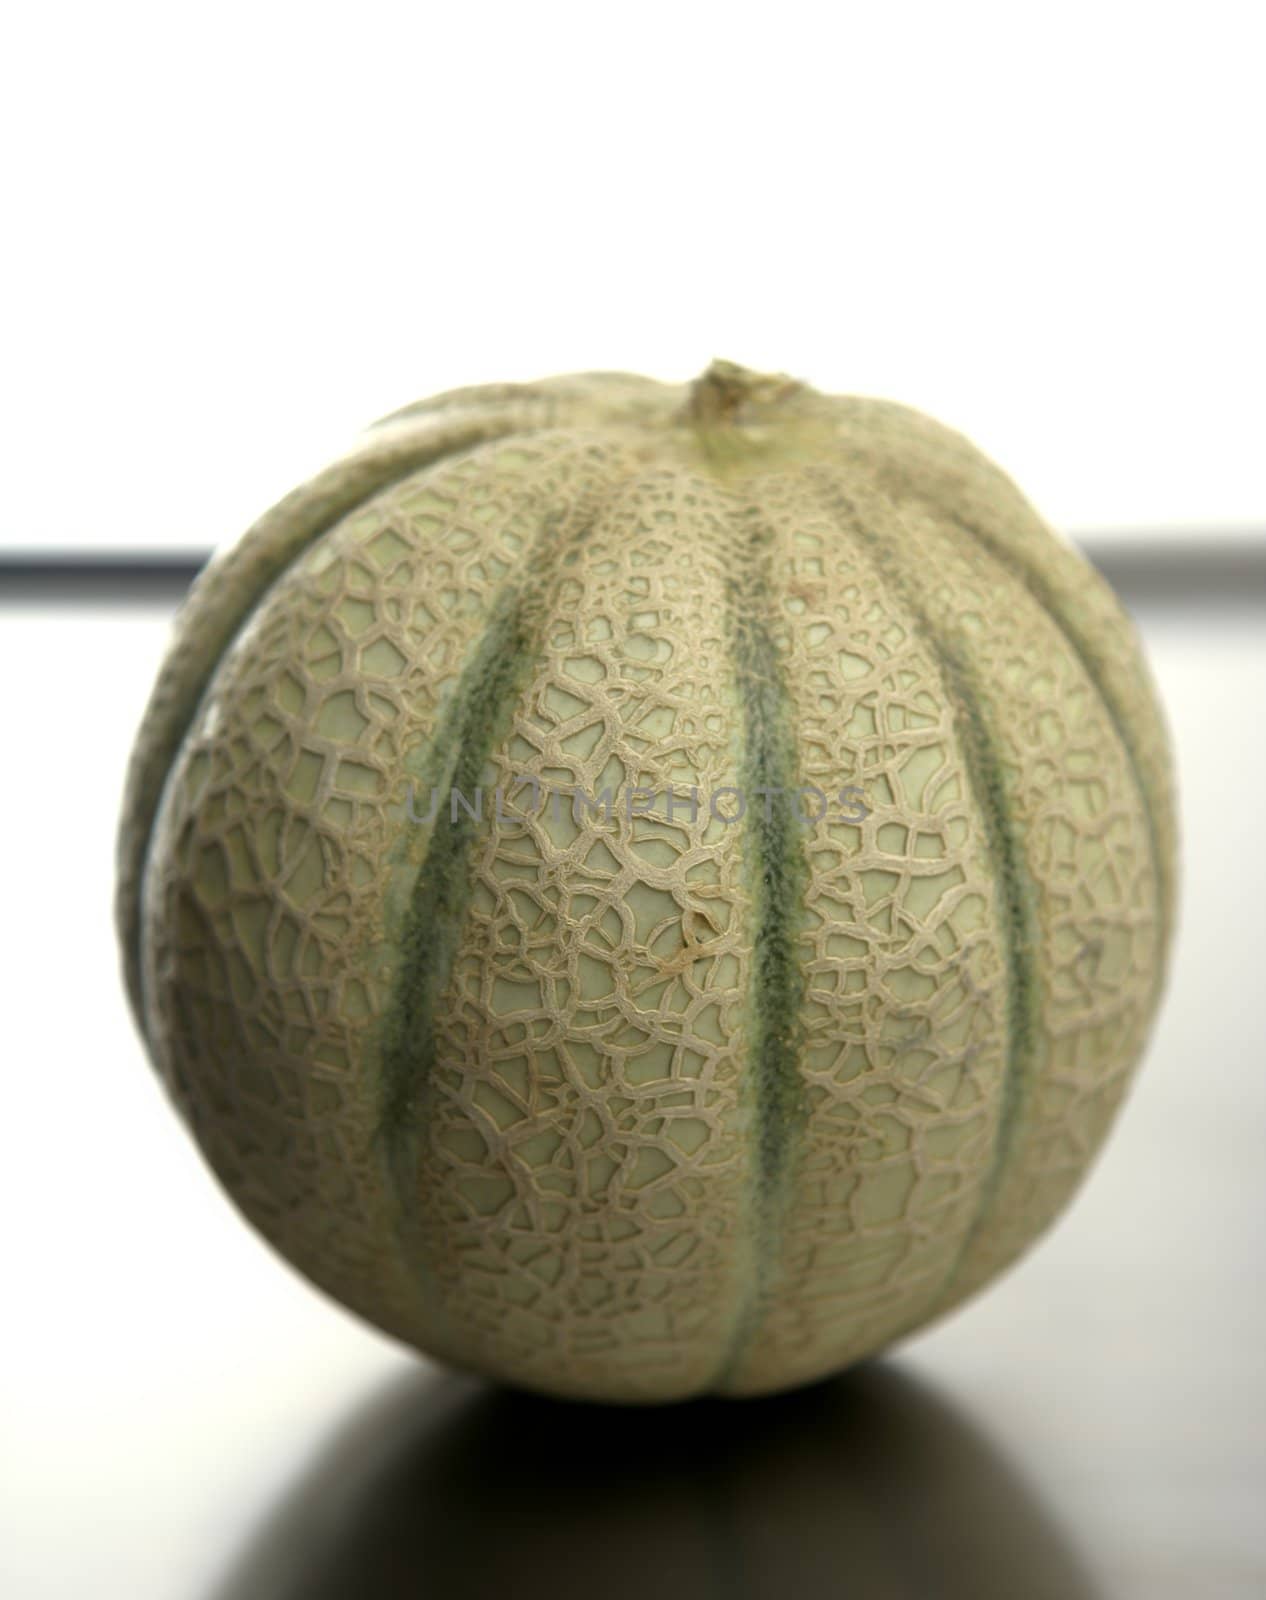 One melon fruit over a stainless steel table